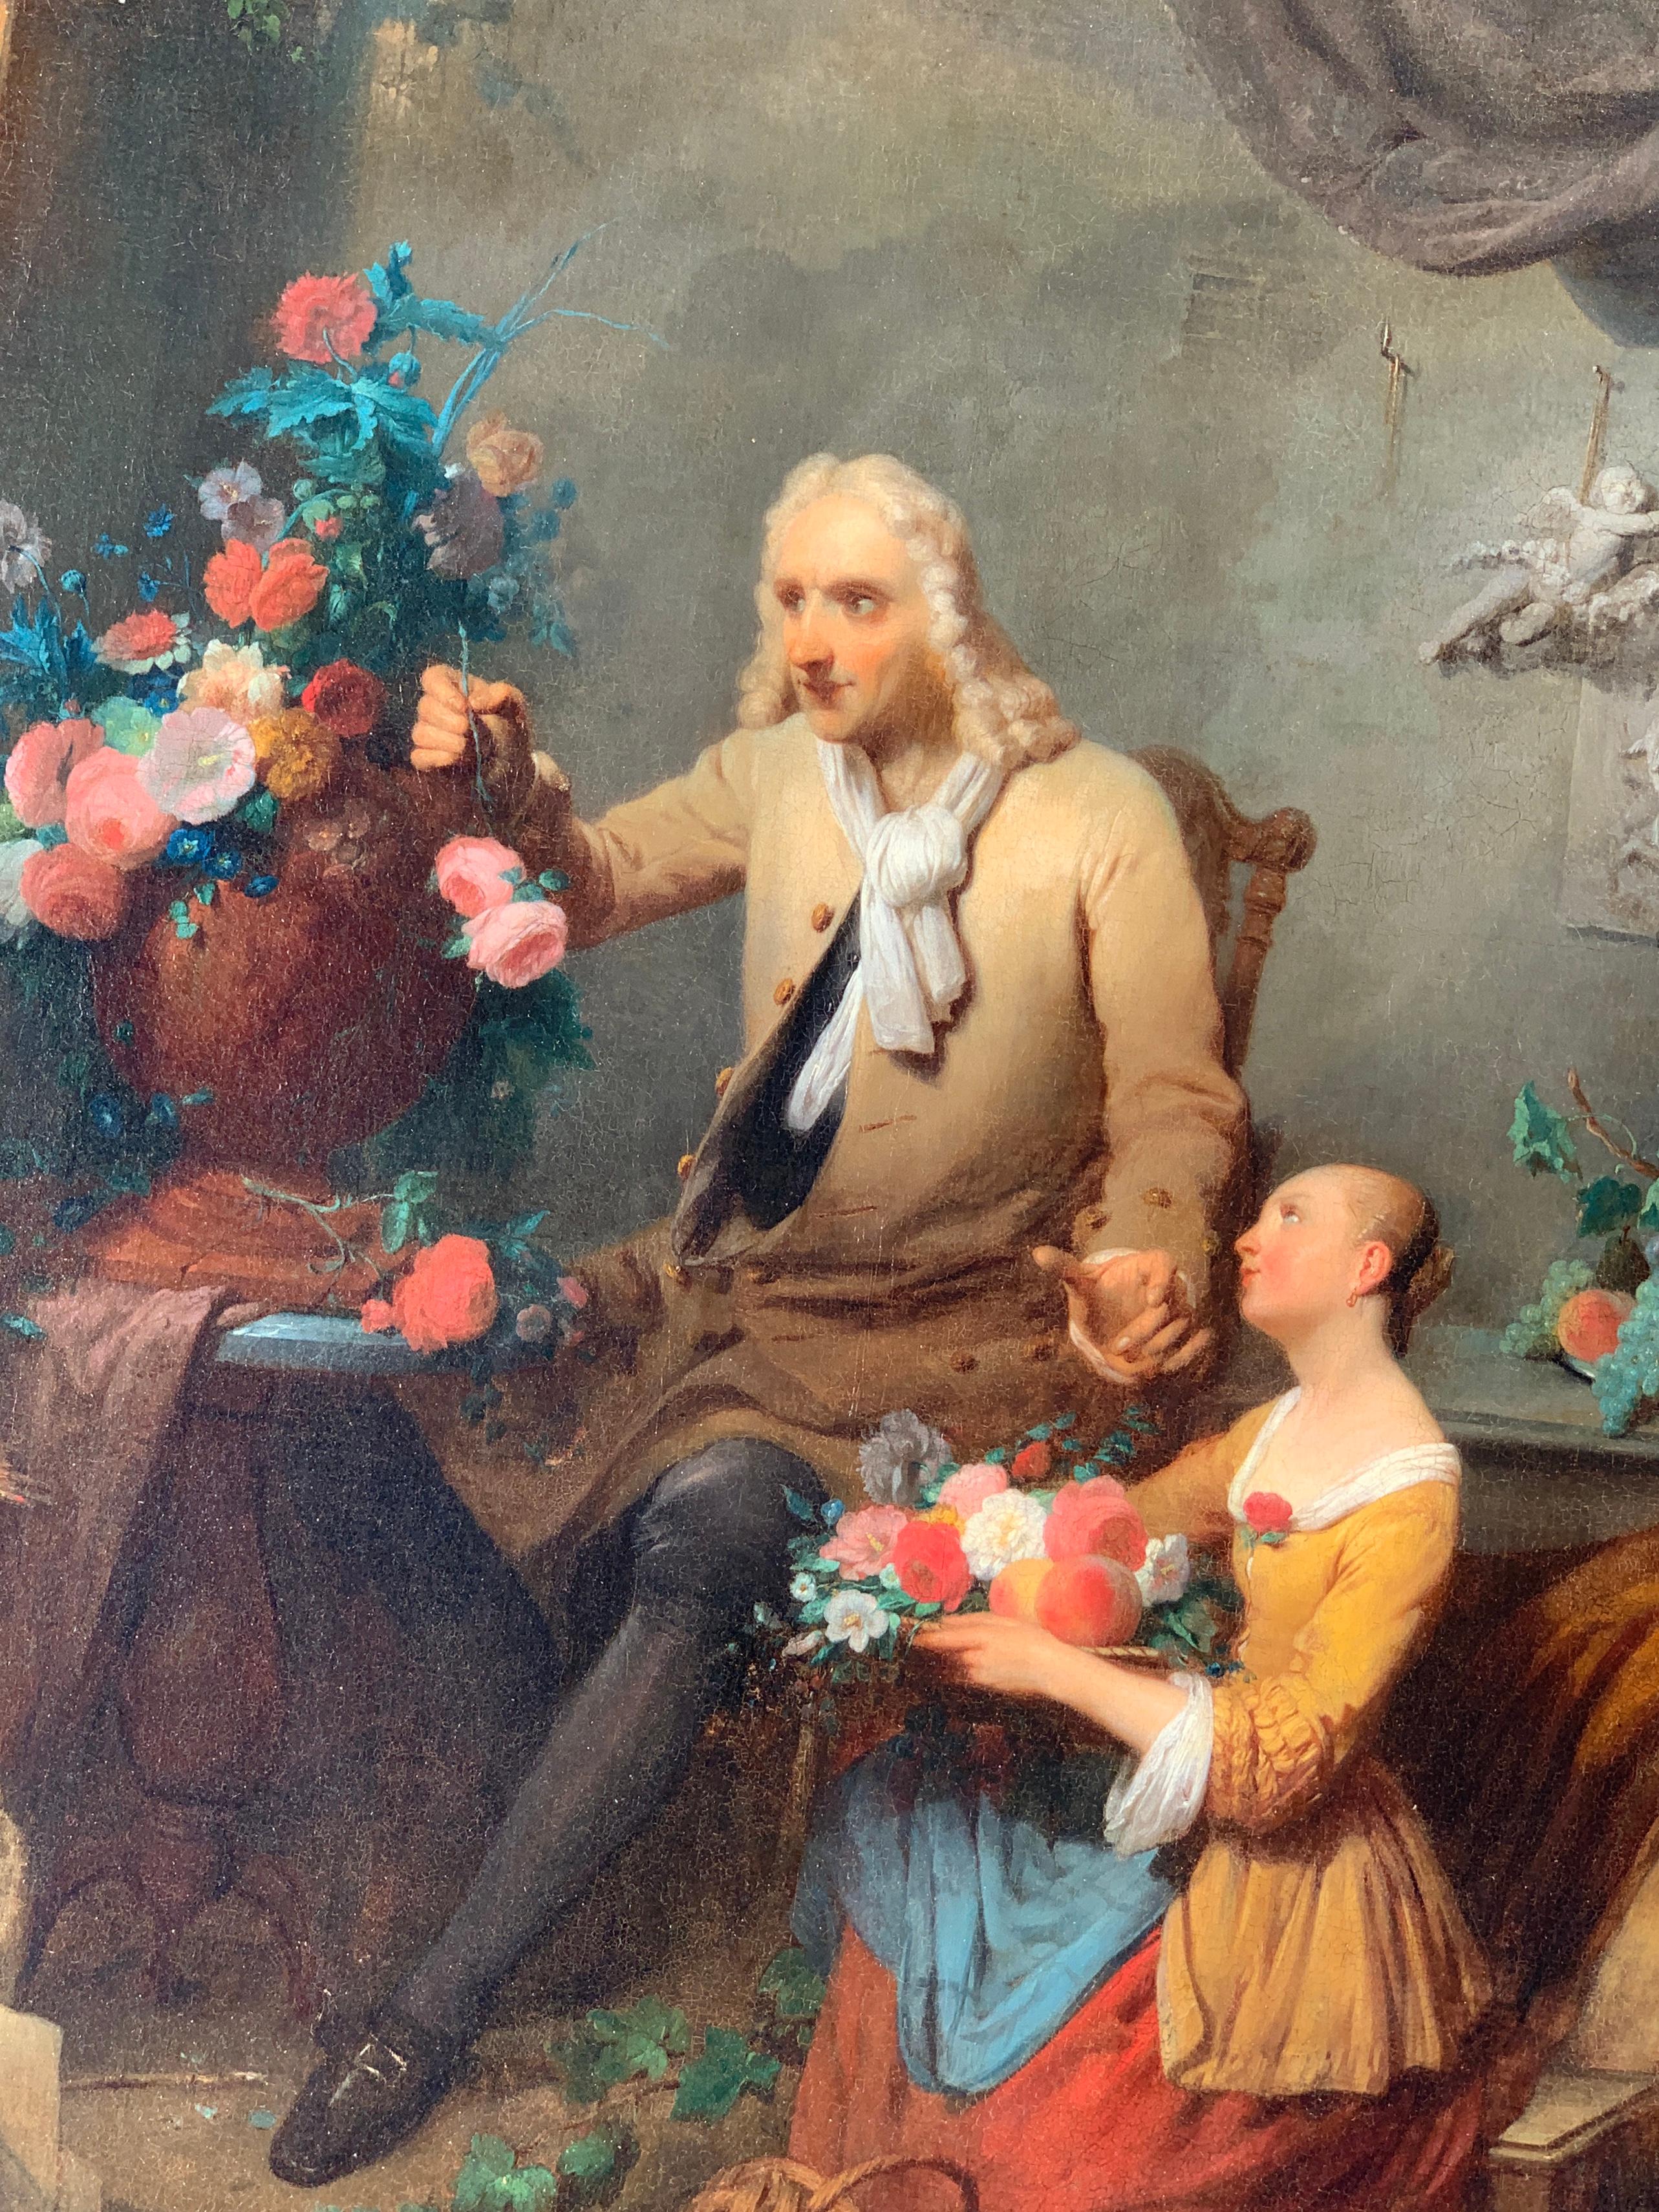 Dutch antique Portrait of an Artist in his studio with a young girl, flowers  - Painting by Petrus Kremer